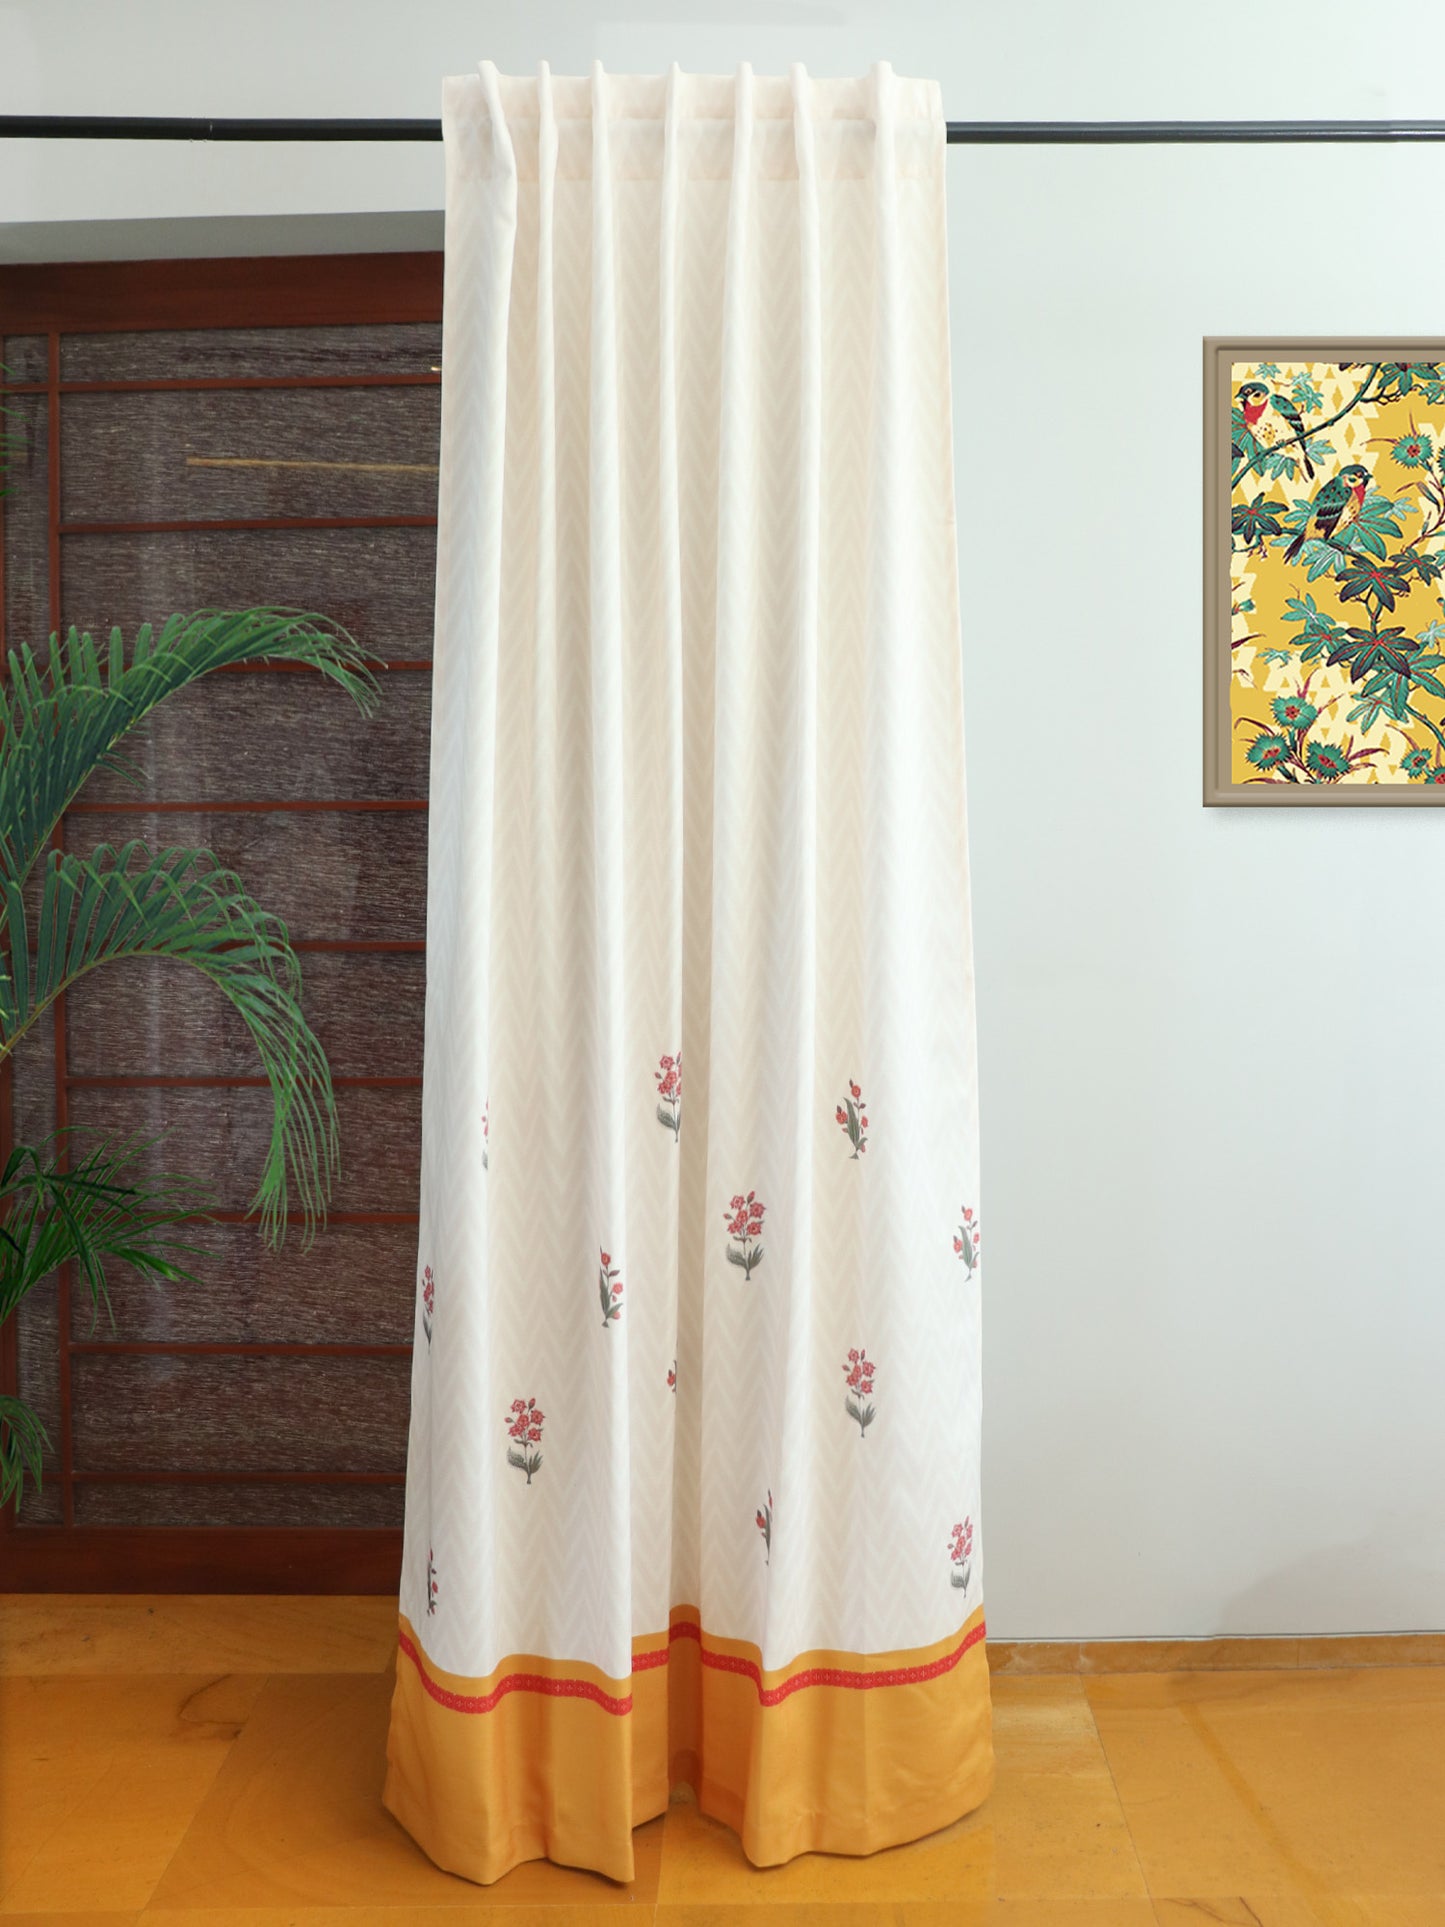 door curtain hidden pocket and floral print with mustard border at bottom, 7feet - 50x84 inch